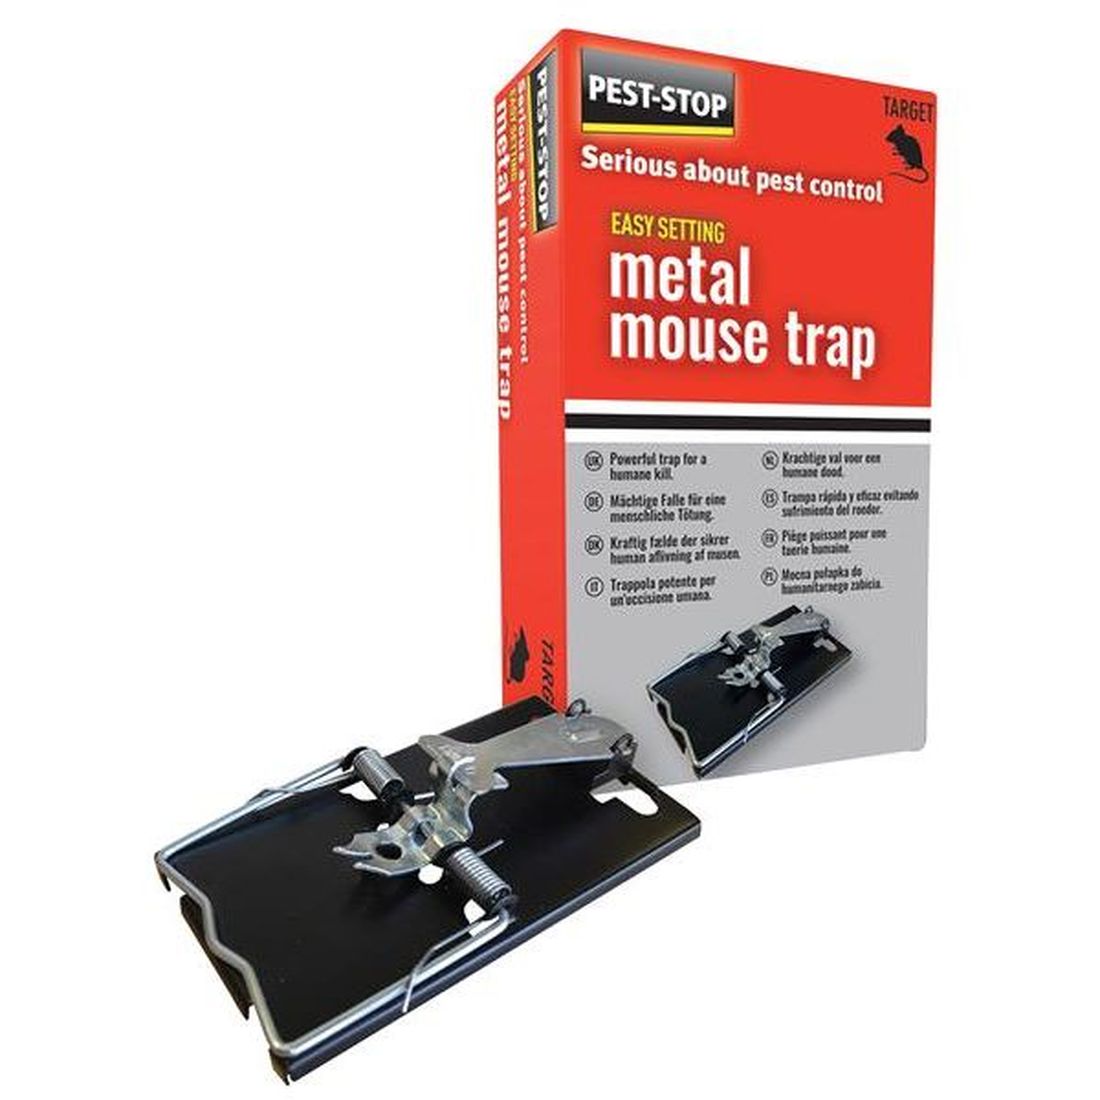 Pest-Stop Easy Setting Metal Mouse Trap     